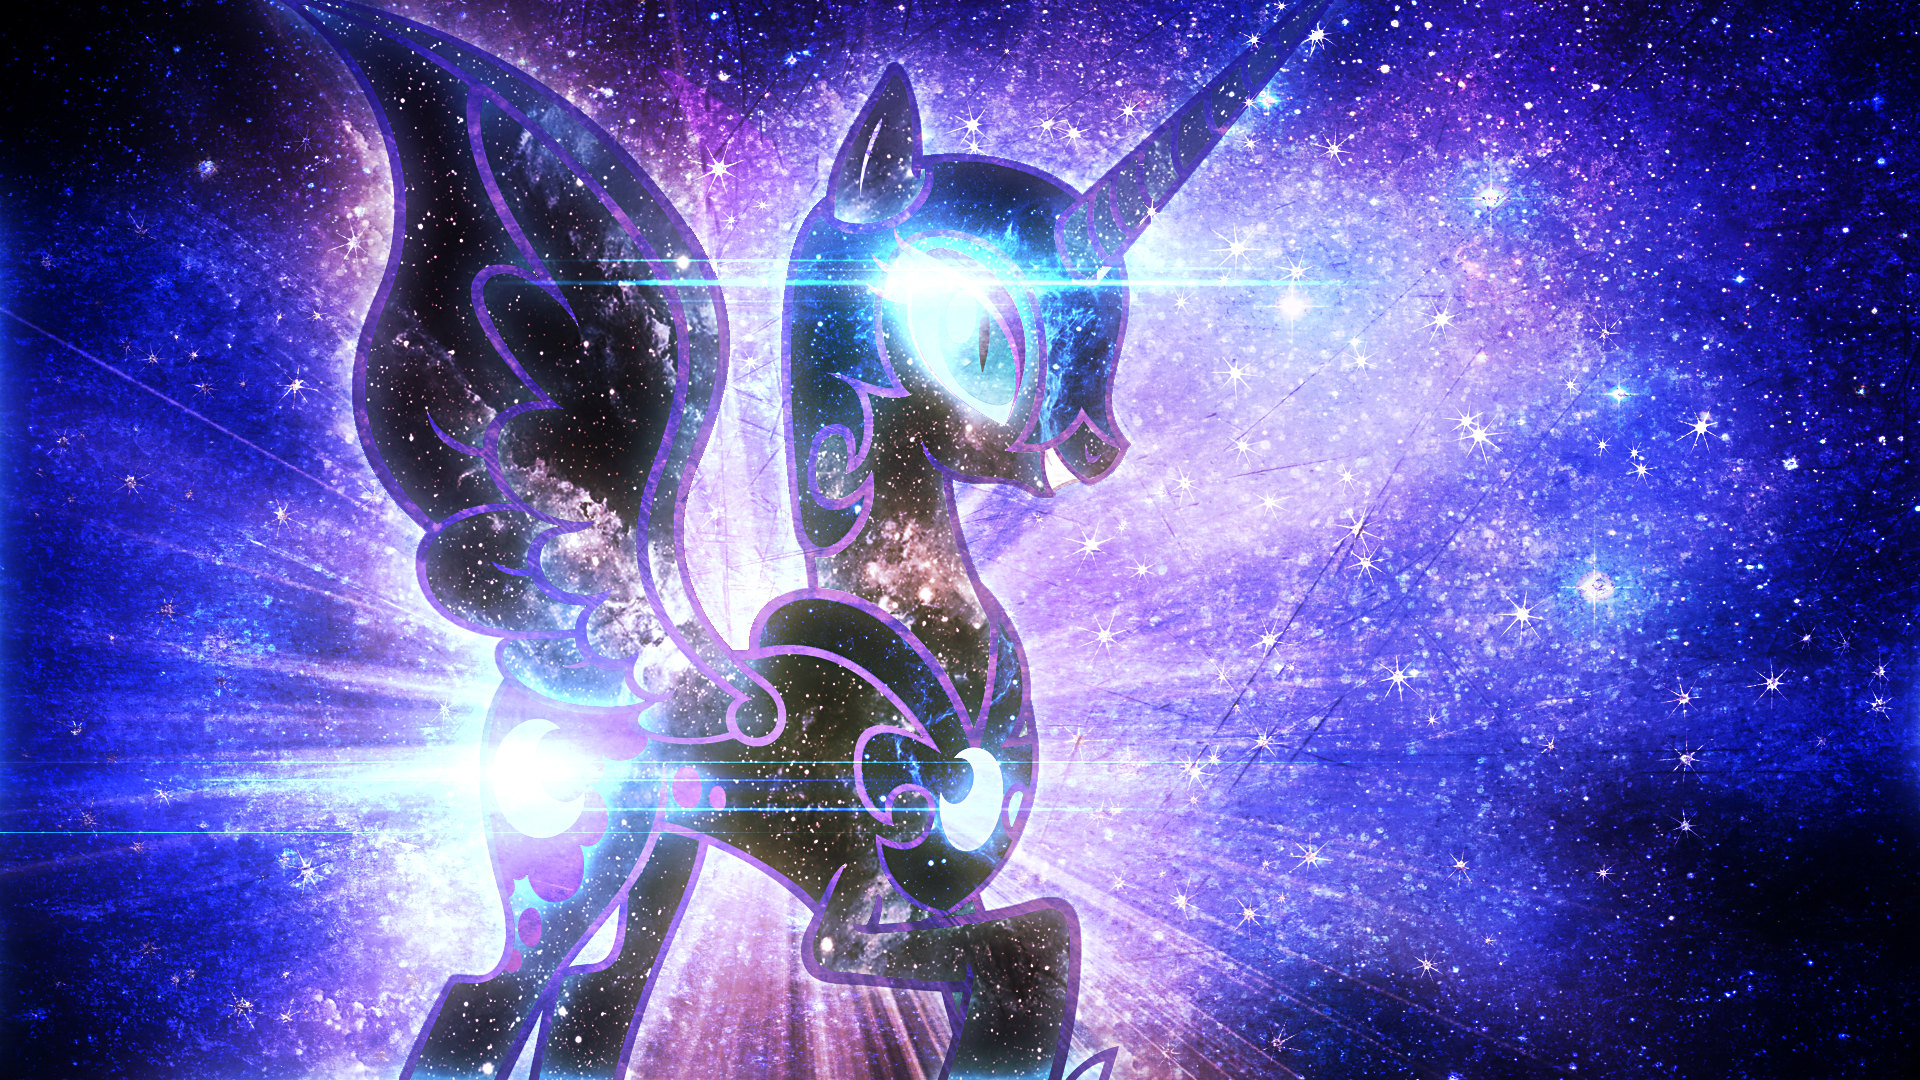 Galactic Nightmare - Wallpaper by MoongazePonies and Tzolkine